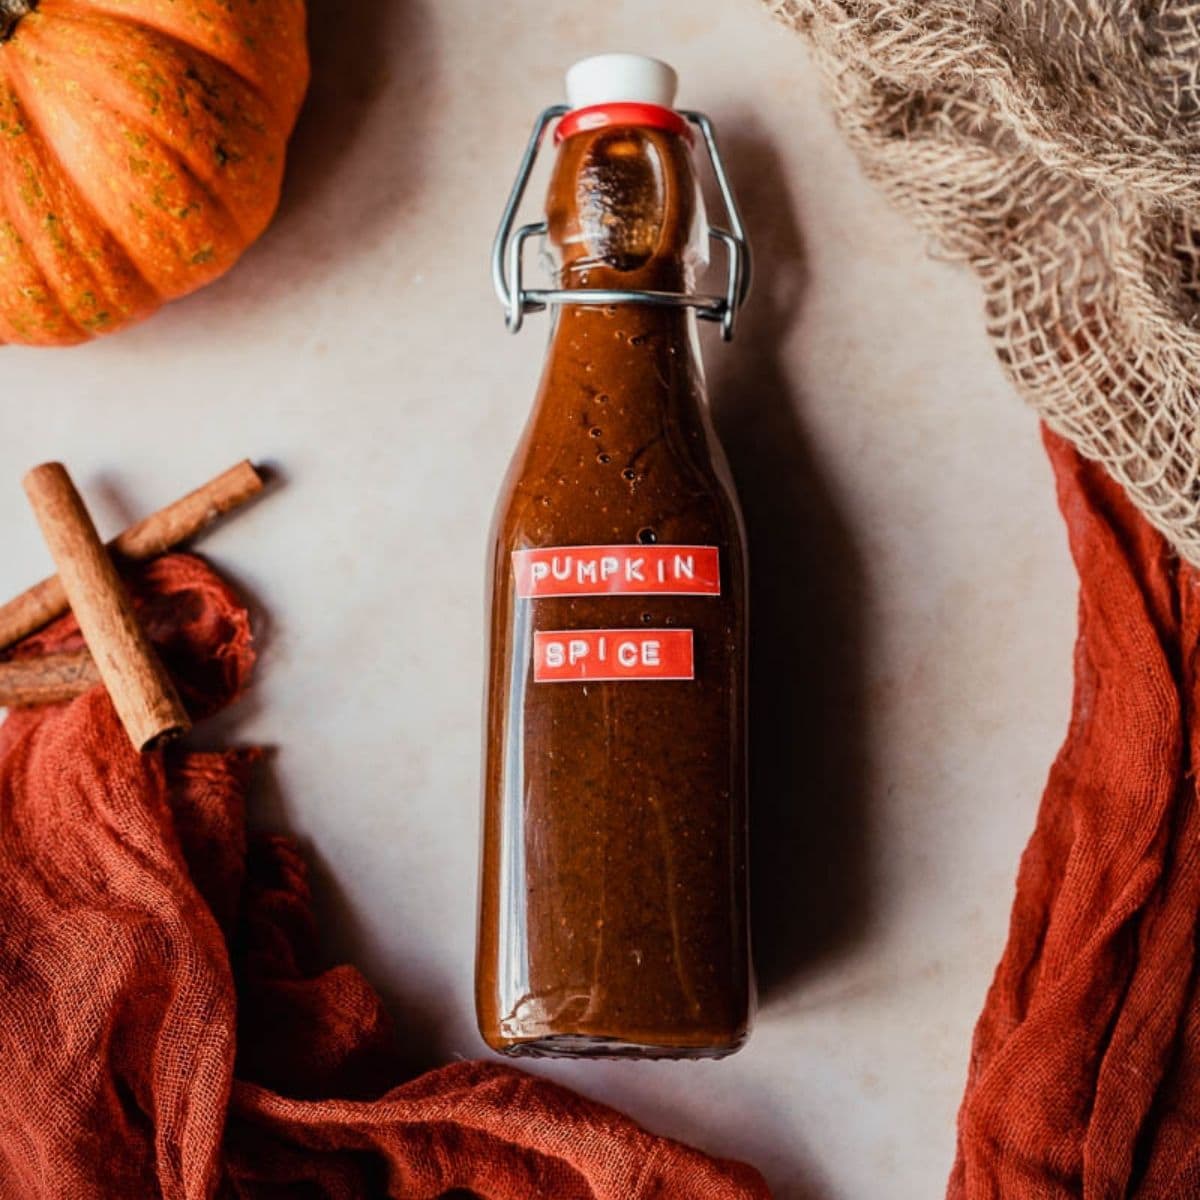 How to Make Pumpkin Spice Syrup at Home (Easy Recipe)